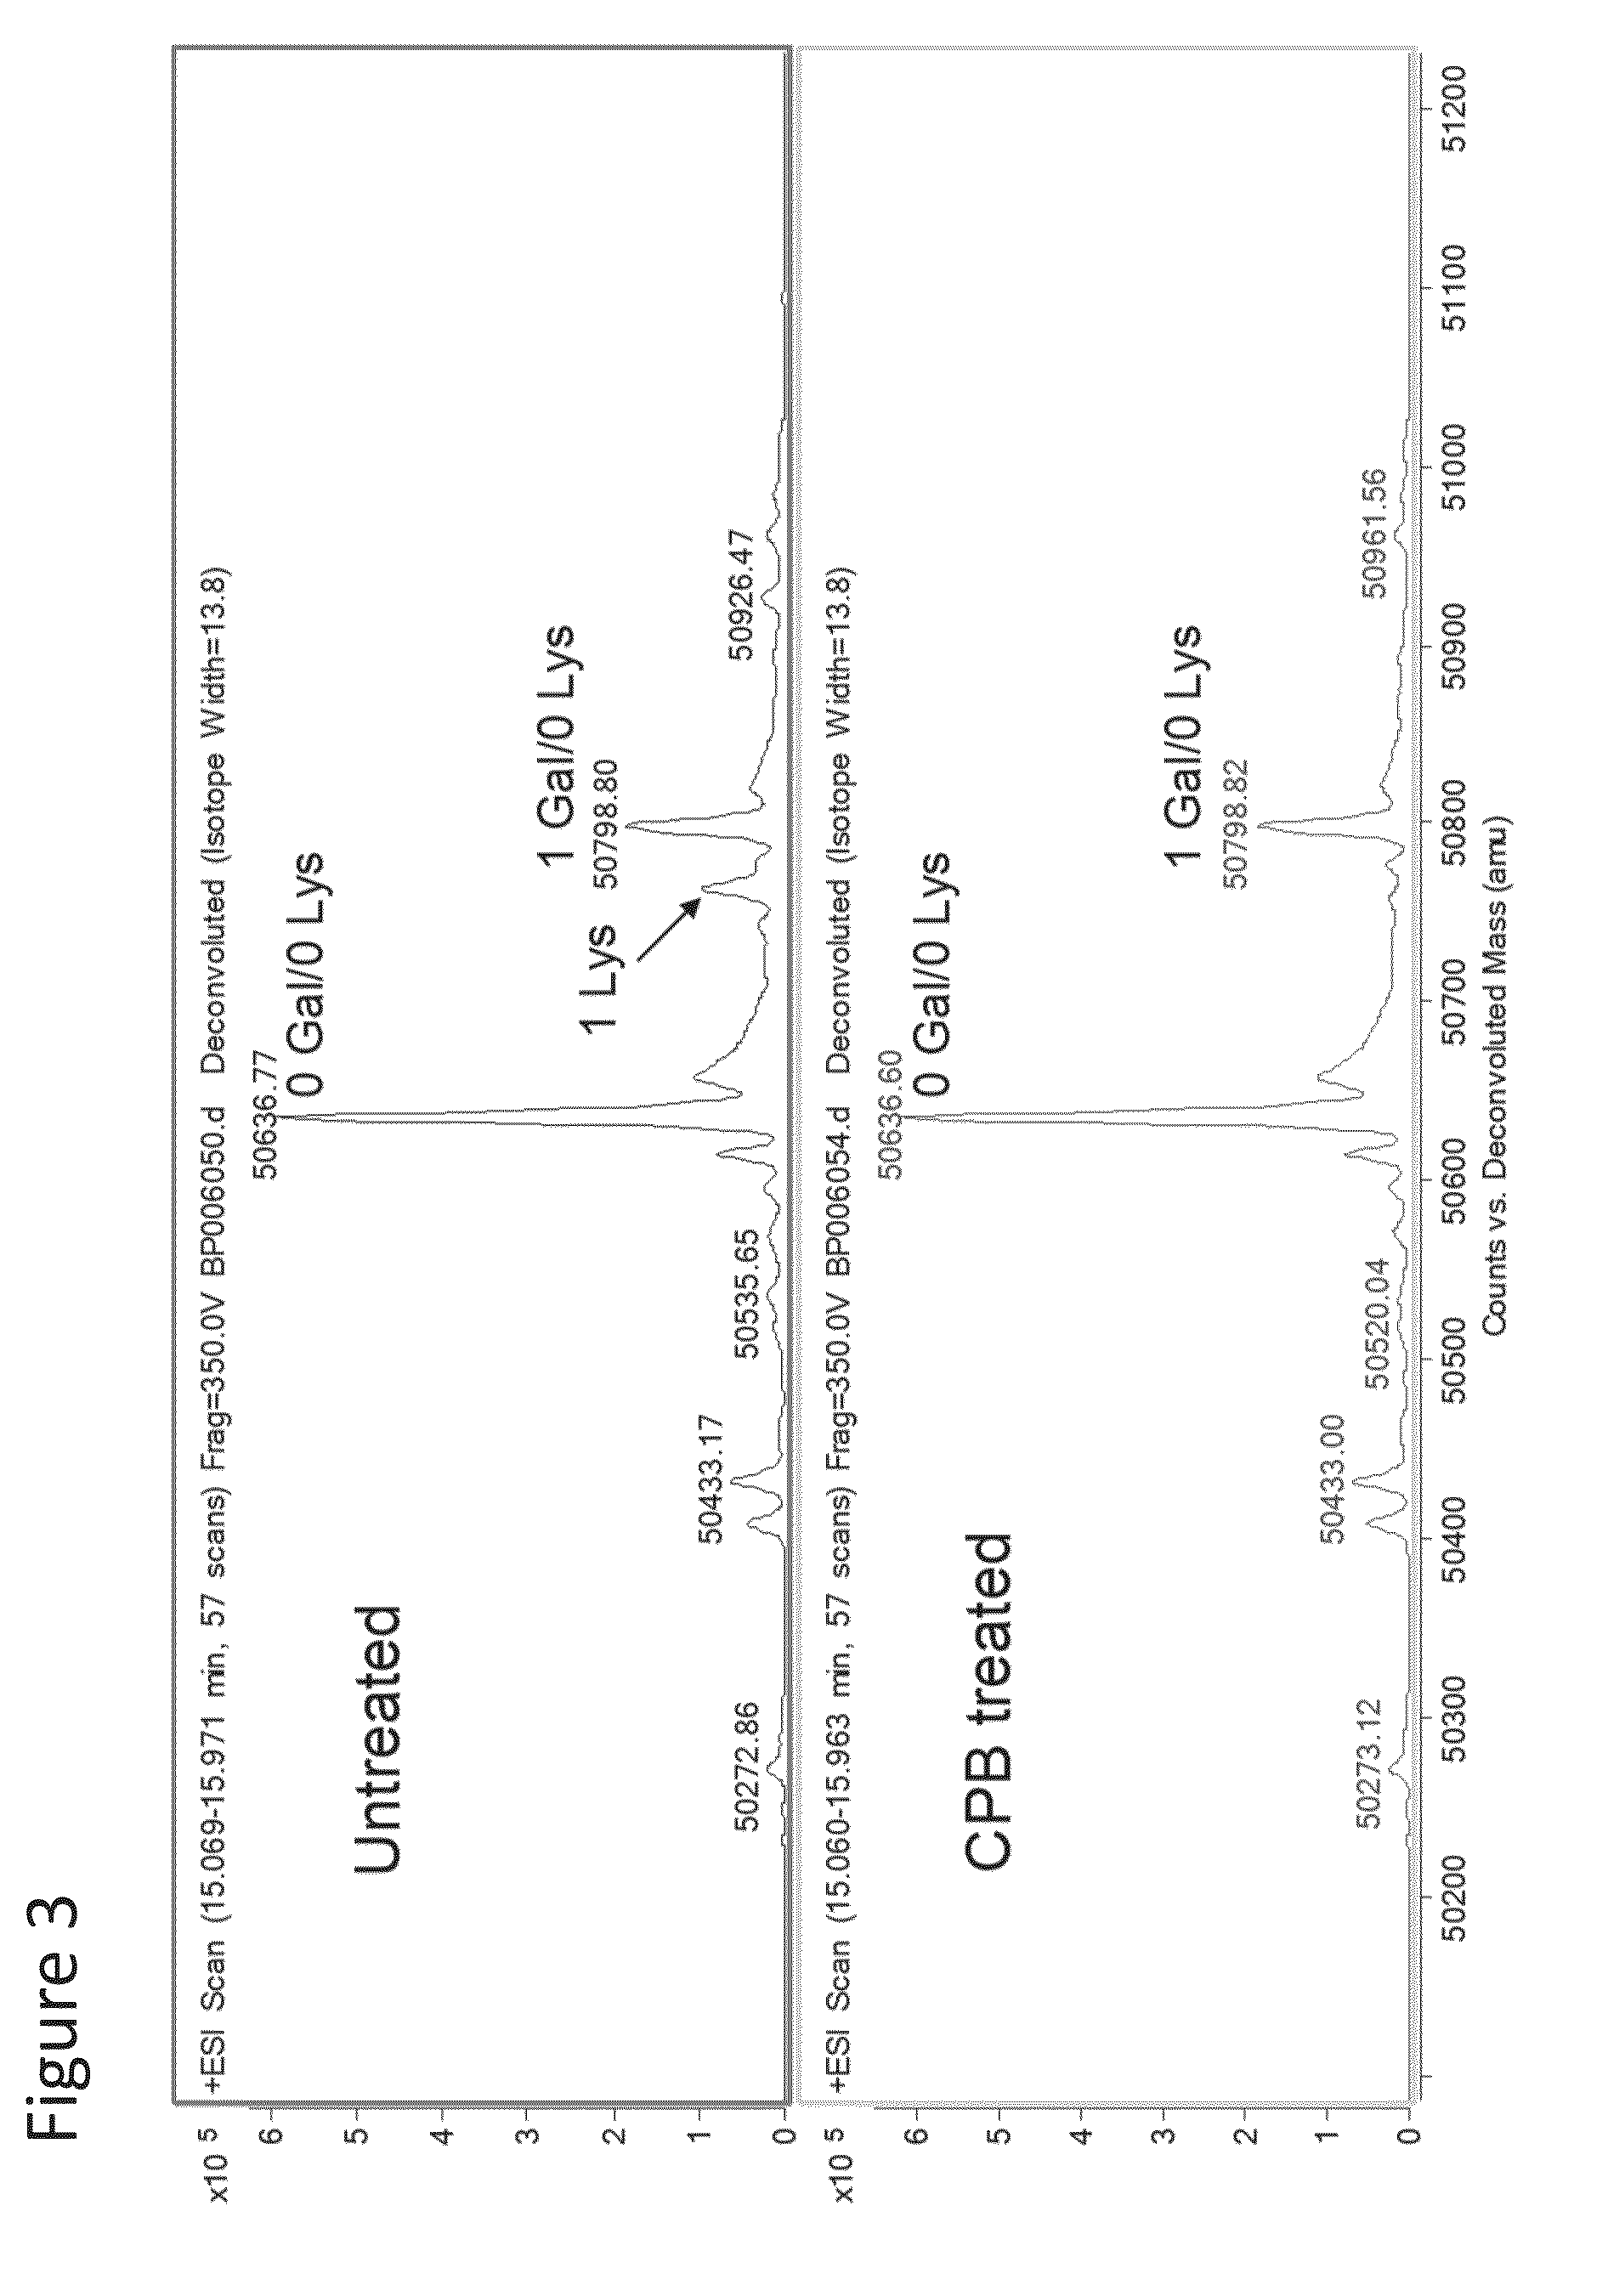 MUTATED ANTI-TNFa ANTIBODIES AND METHODS OF THEIR USE